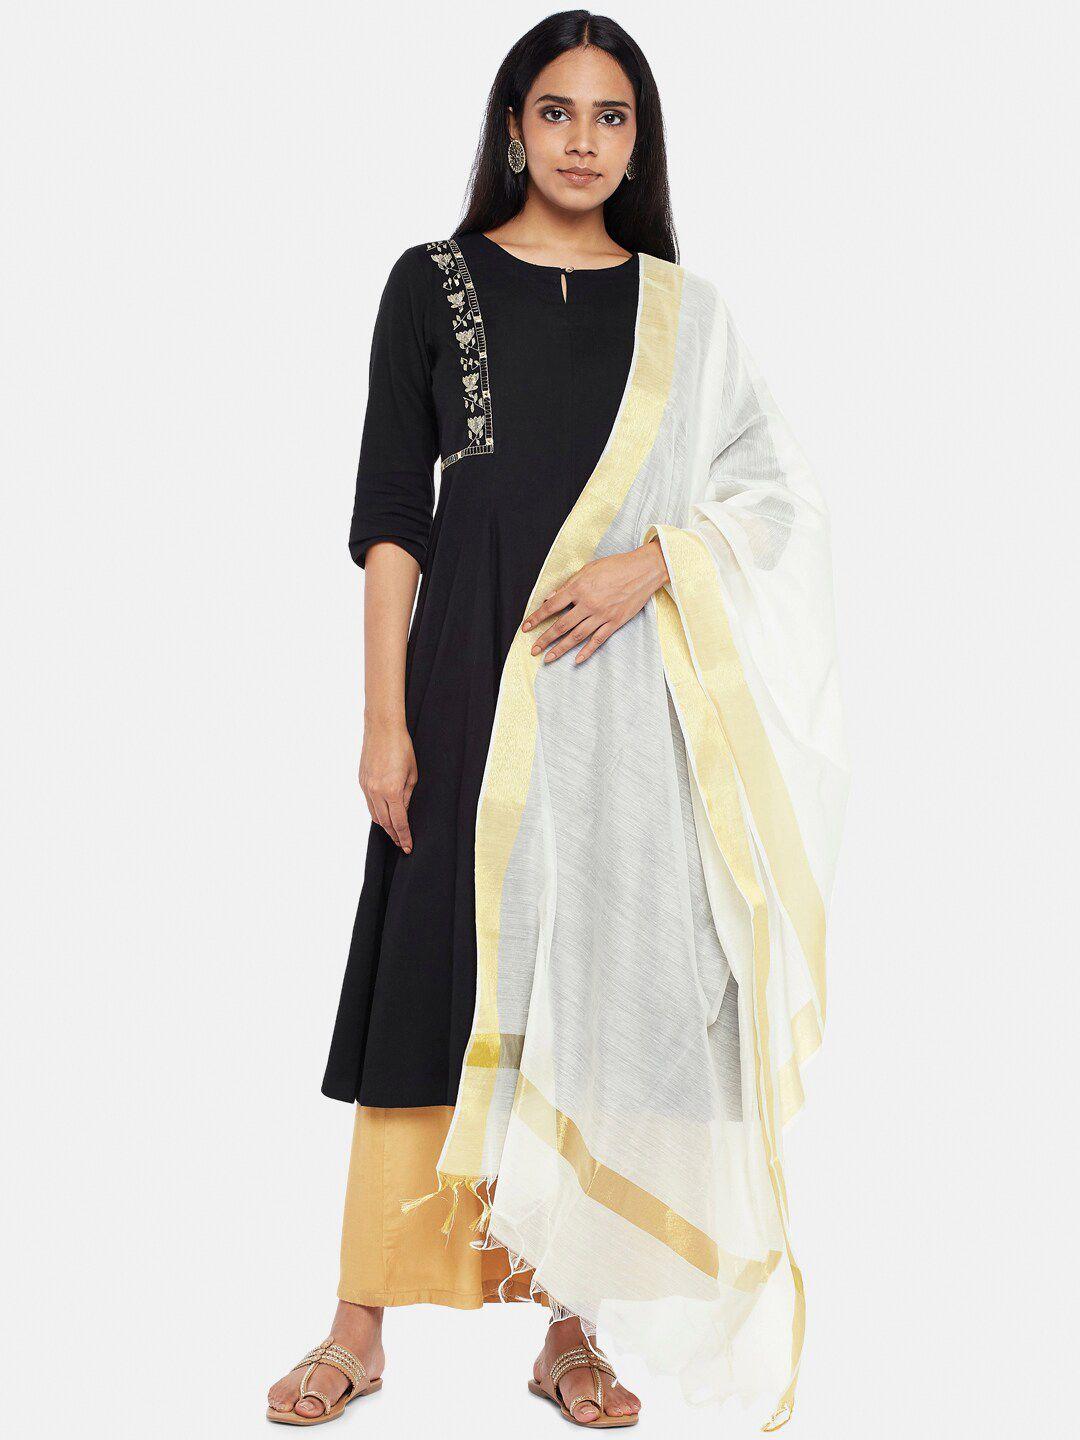 rangmanch by pantaloons off white & gold-toned solid dupatta